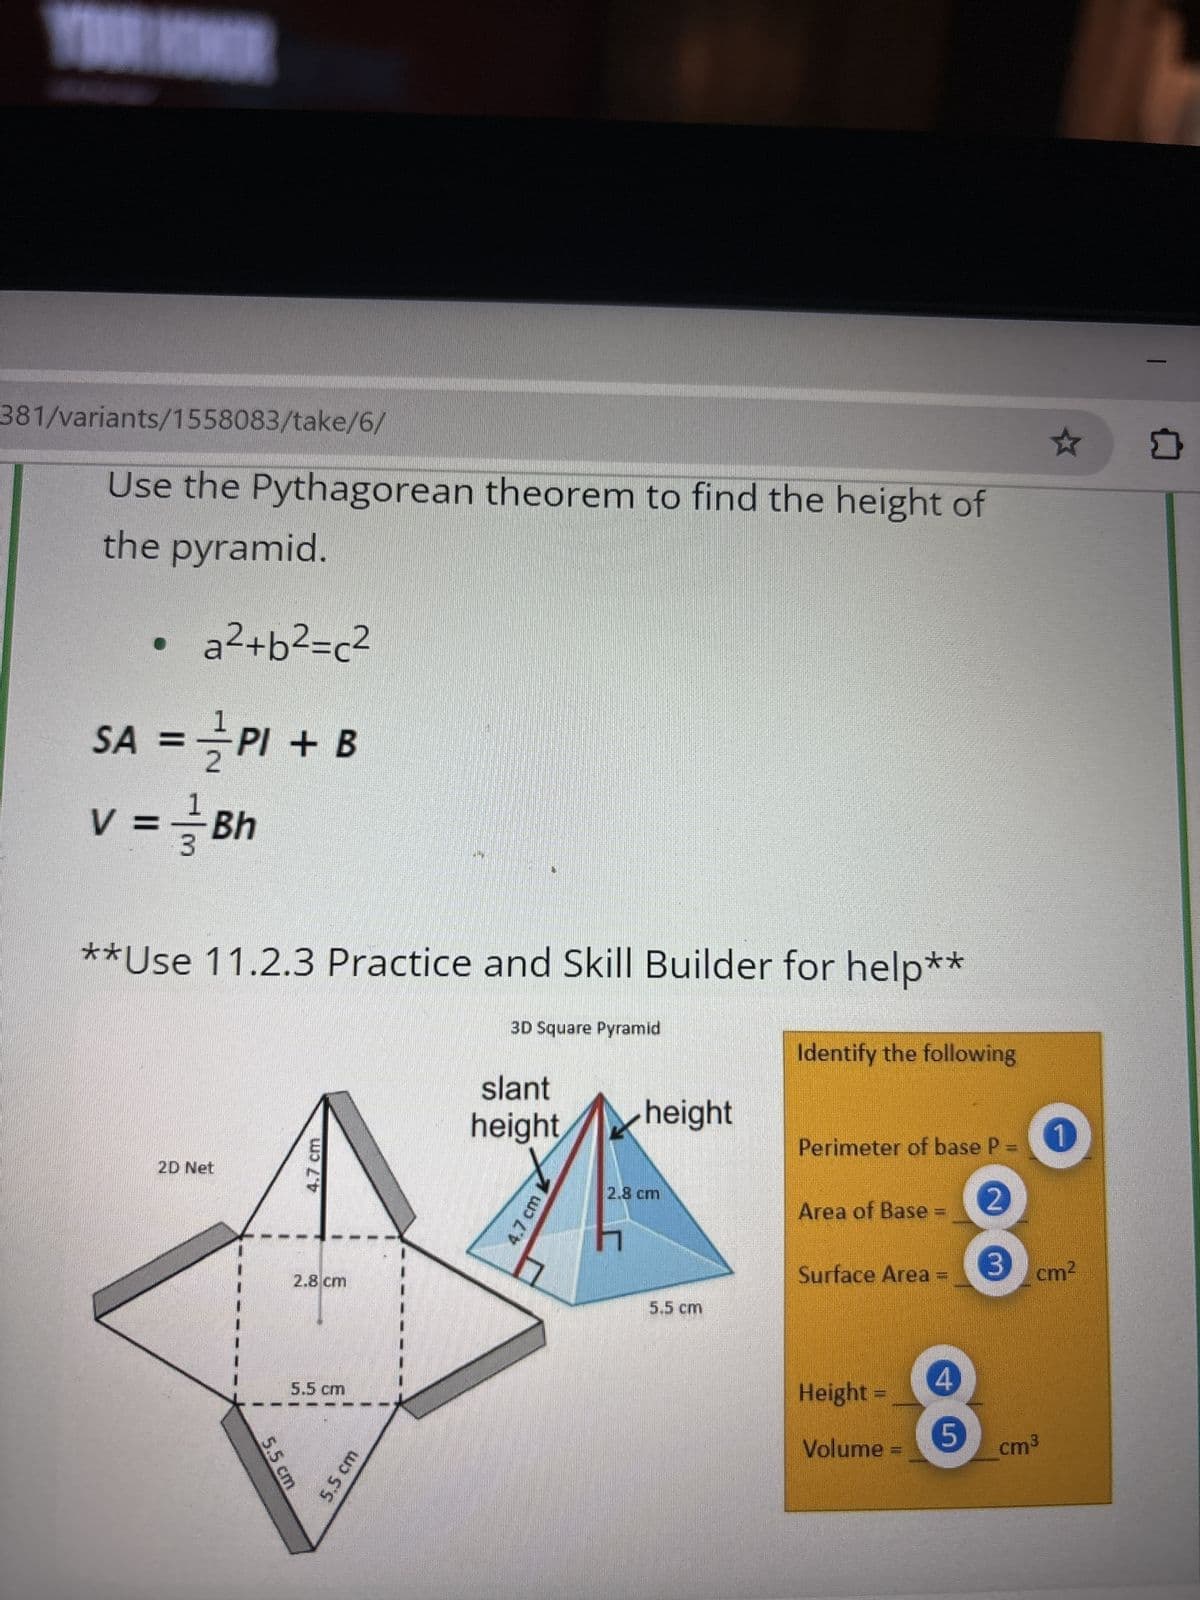 381/variants/1558083/take/6/
Use the Pythagorean theorem to find the height of
the pyramid.
a²+b²=c²
1
SA = PI + B
v = 1/1 Bh
3
**Use 11.2.3 Practice and Skill Builder for help**
2D Net
4.7 cm
2.8 cm
3D Square Pyramid
slant
height
4.7 cm
☆
Identify the following
height
Perimeter of base P =
2.8 cm
2
Area of Base
Surface Area =
3
cm²
5.5 cm
5.5 cm
5.5 cm
5.5 cm
Height =
Volume =
5
cm³